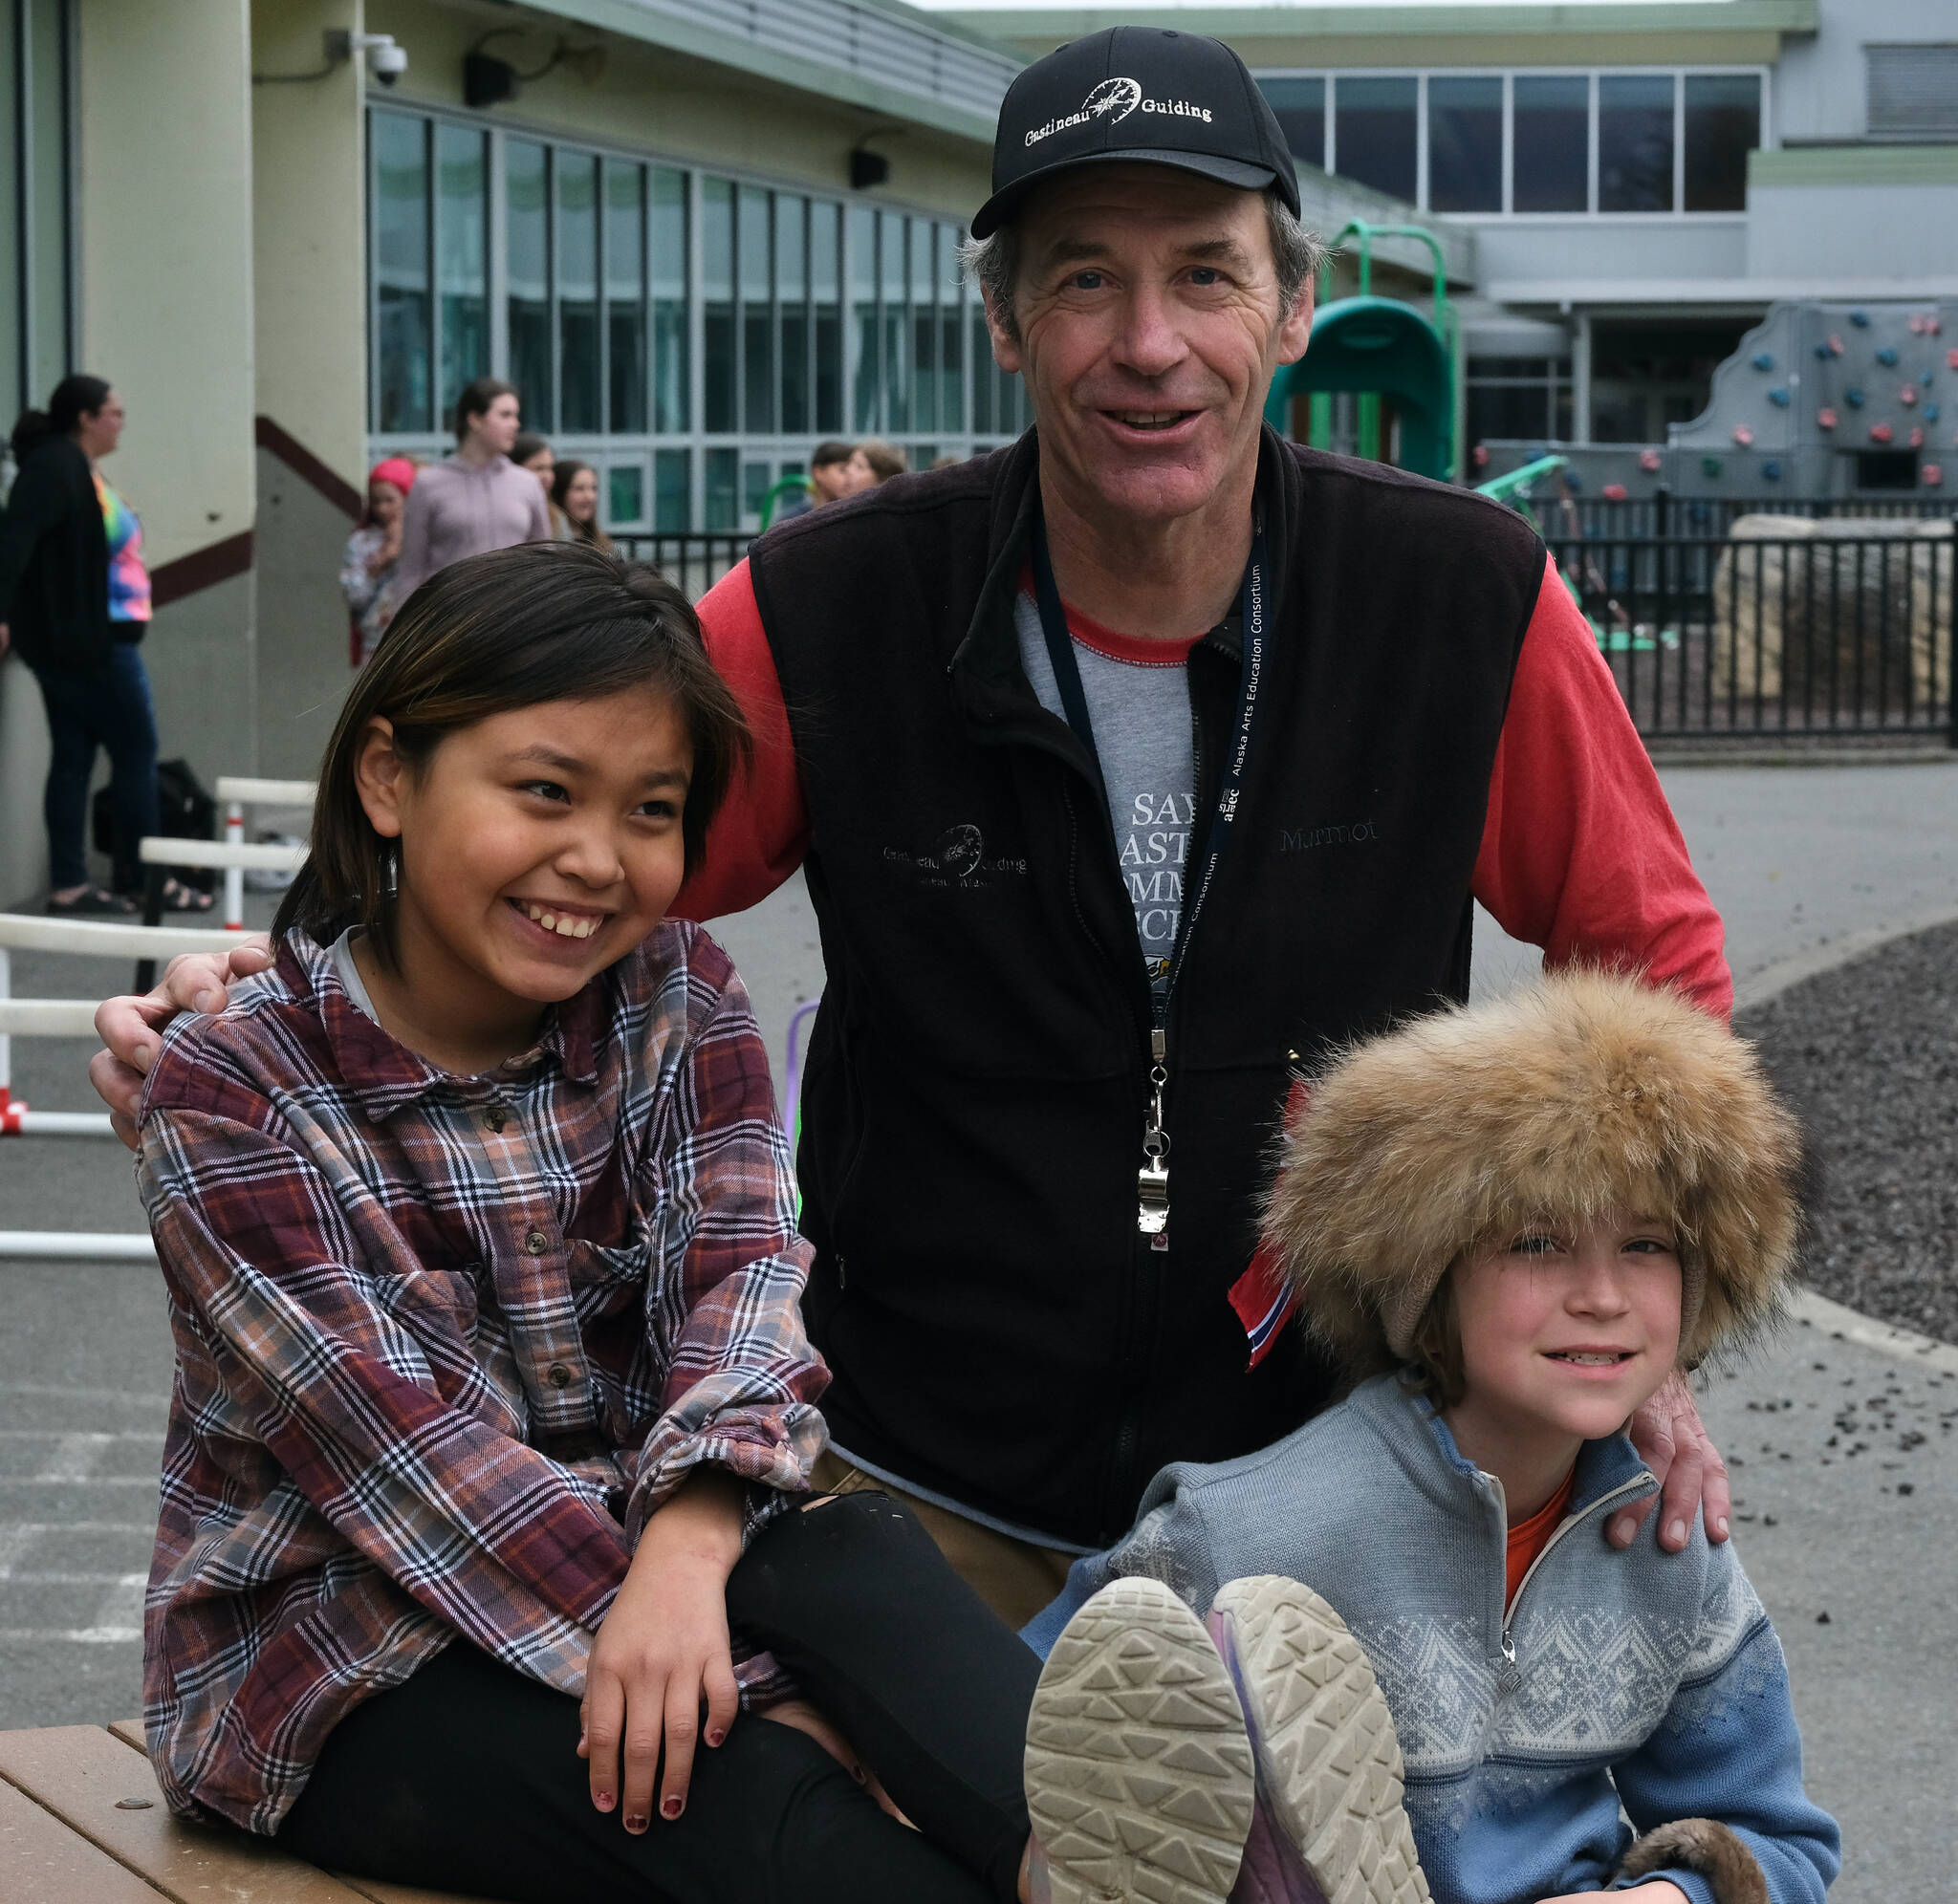 Sayéik: Gastineau Community School physical education teacher Dirk Miller poses with Nevaea Johnson and Nolan Seris during a Field Day break at the school Thursday. Miller is retiring after 24 years at the school. (Klas Stolpe / Juneau Empire)